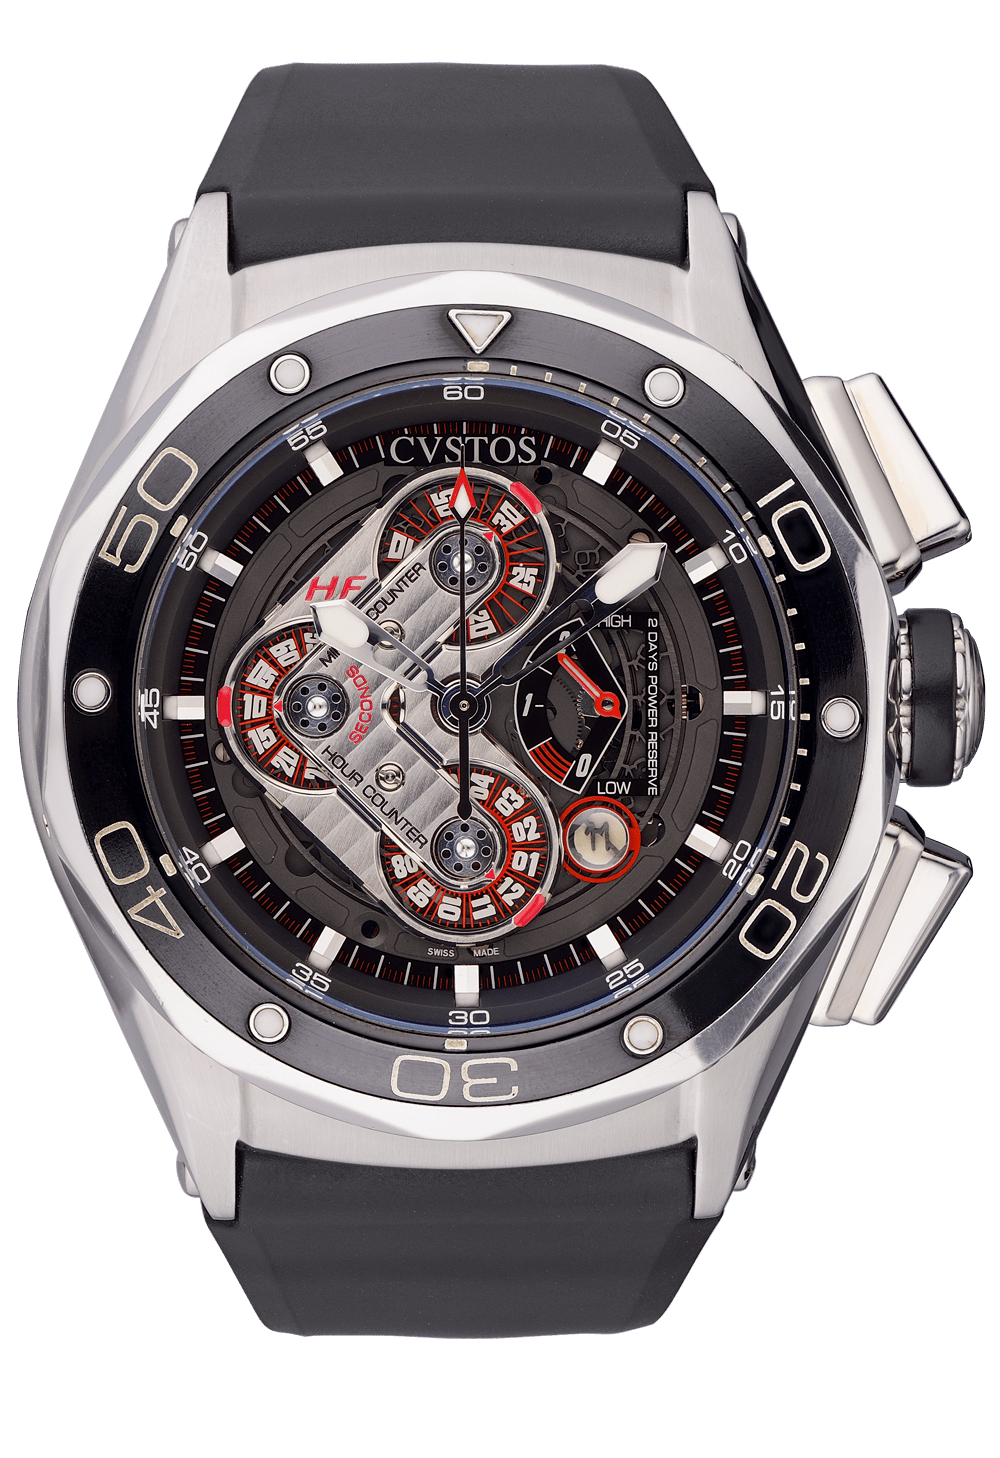 Cvstos Challenge GT Chronograph – Hands-on Review